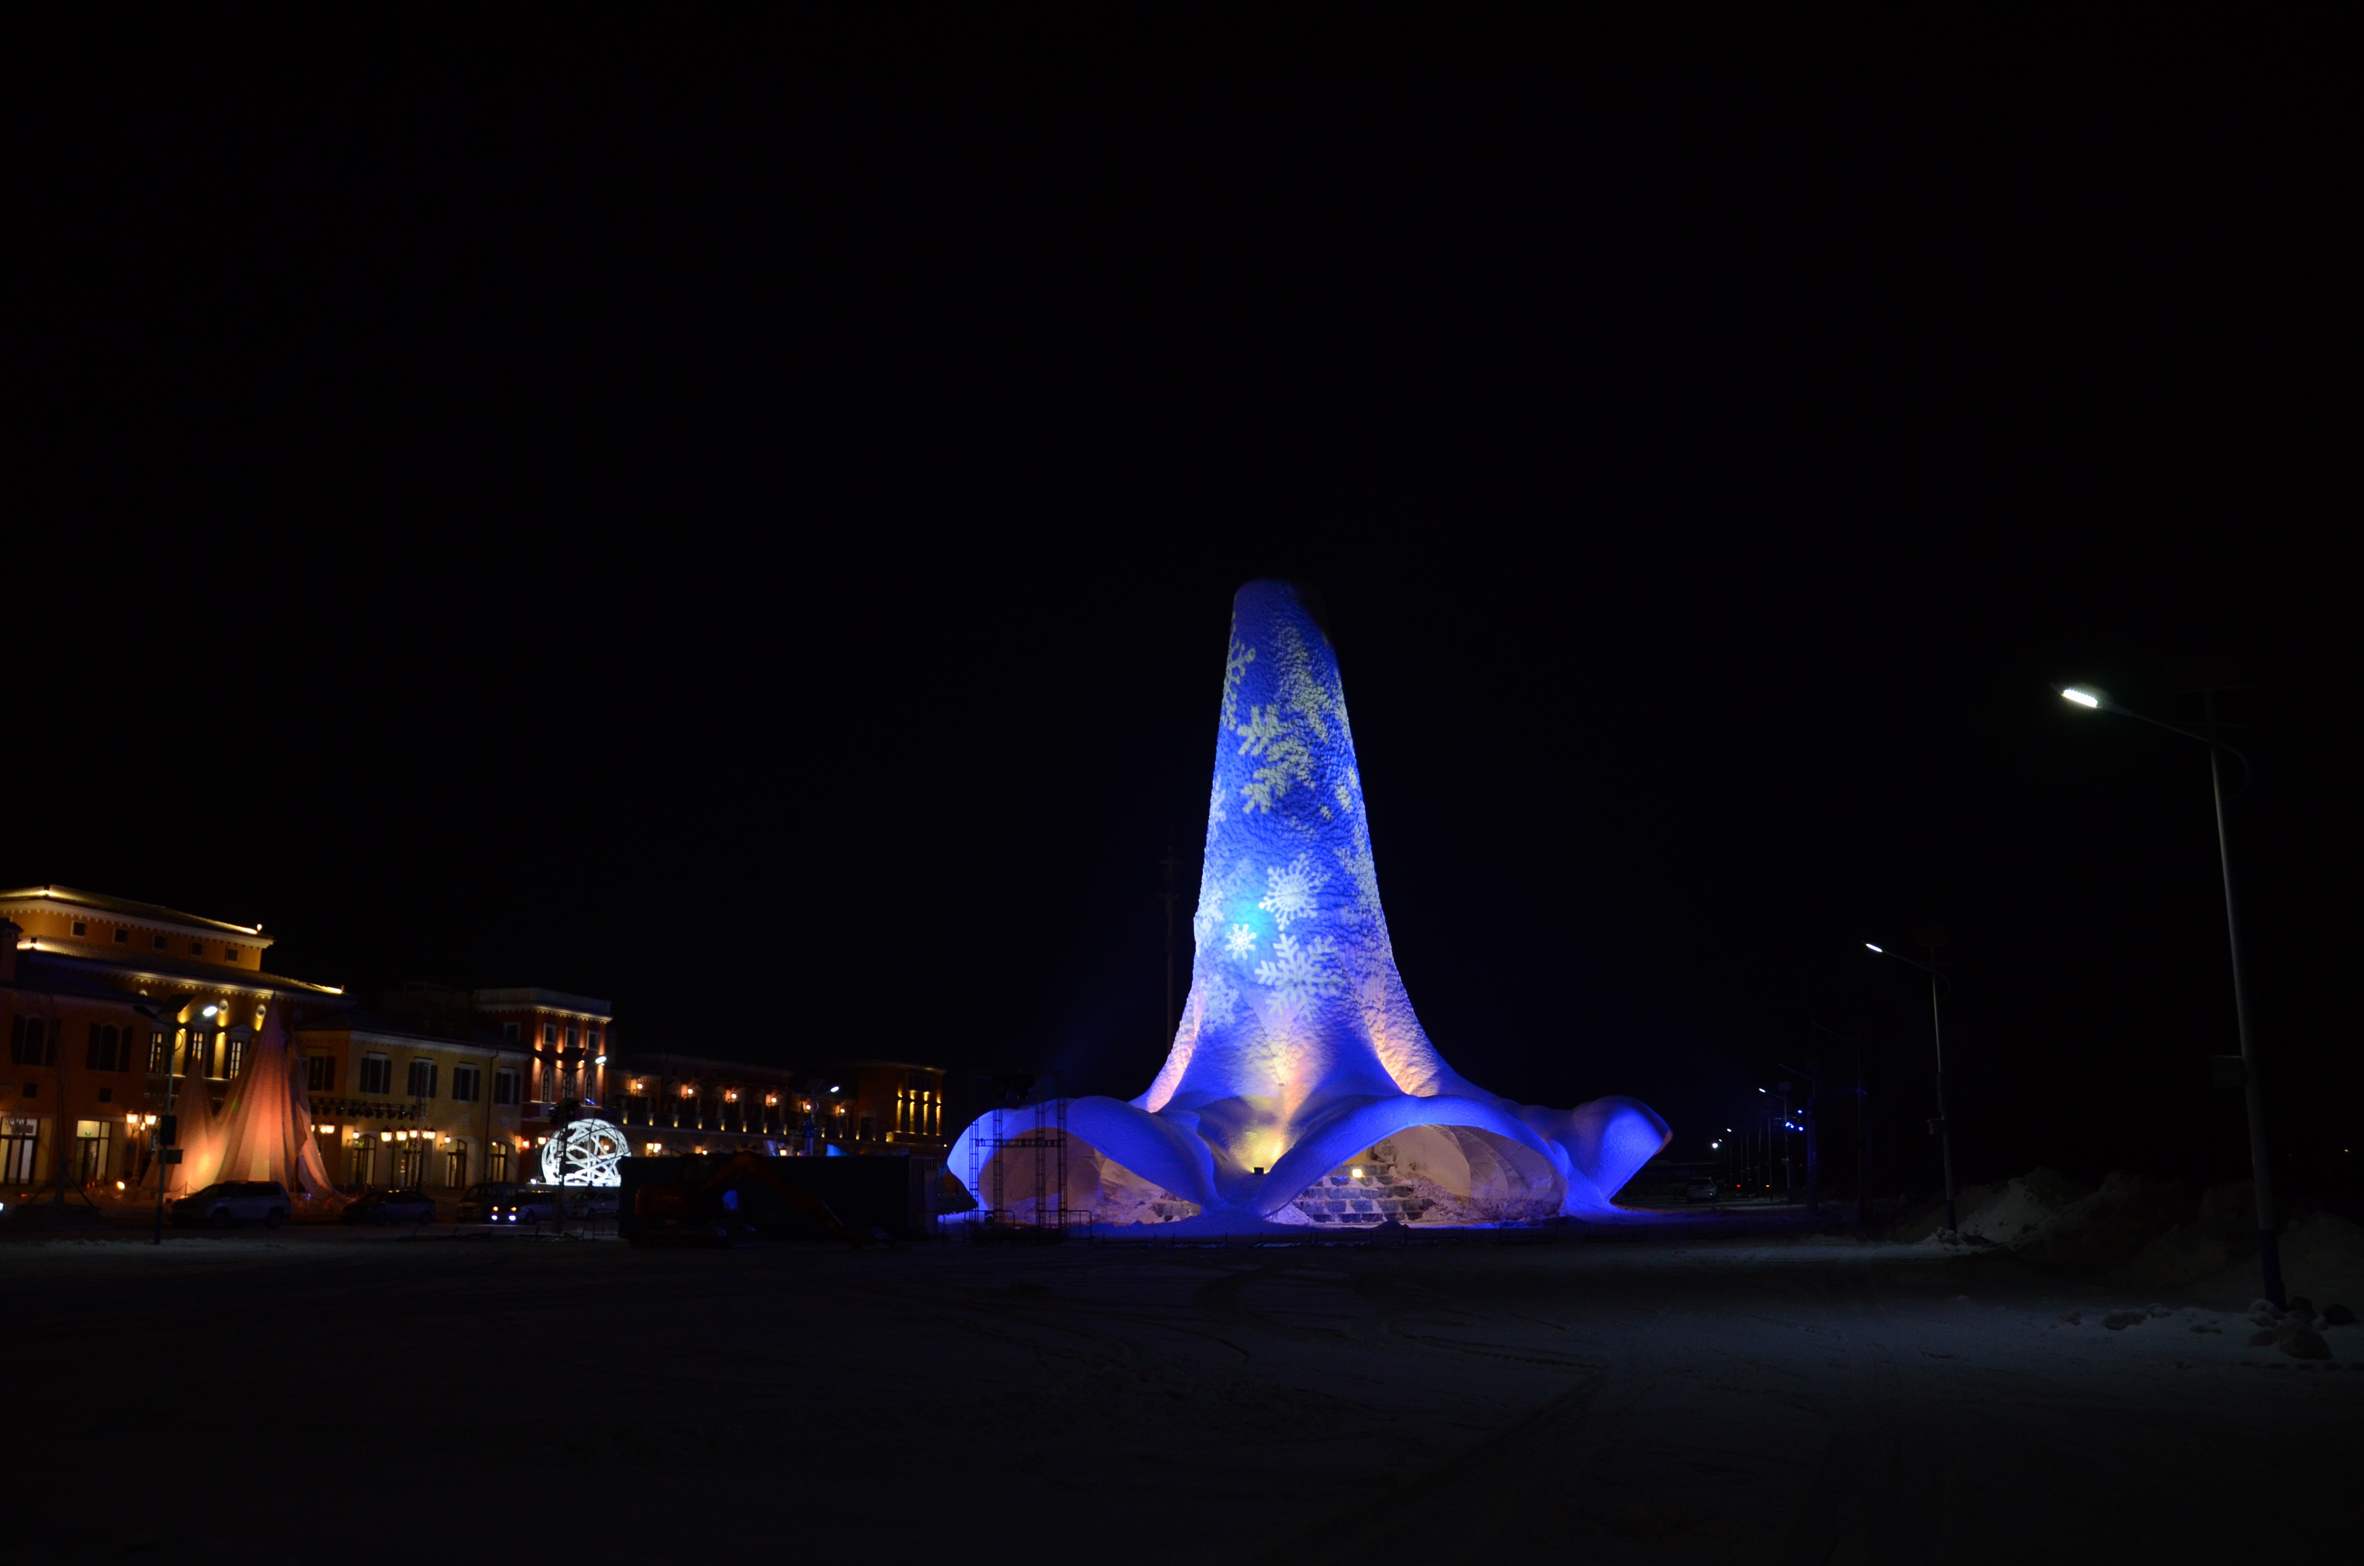 Flamenco Ice Tower by Eindhoven University of Technology